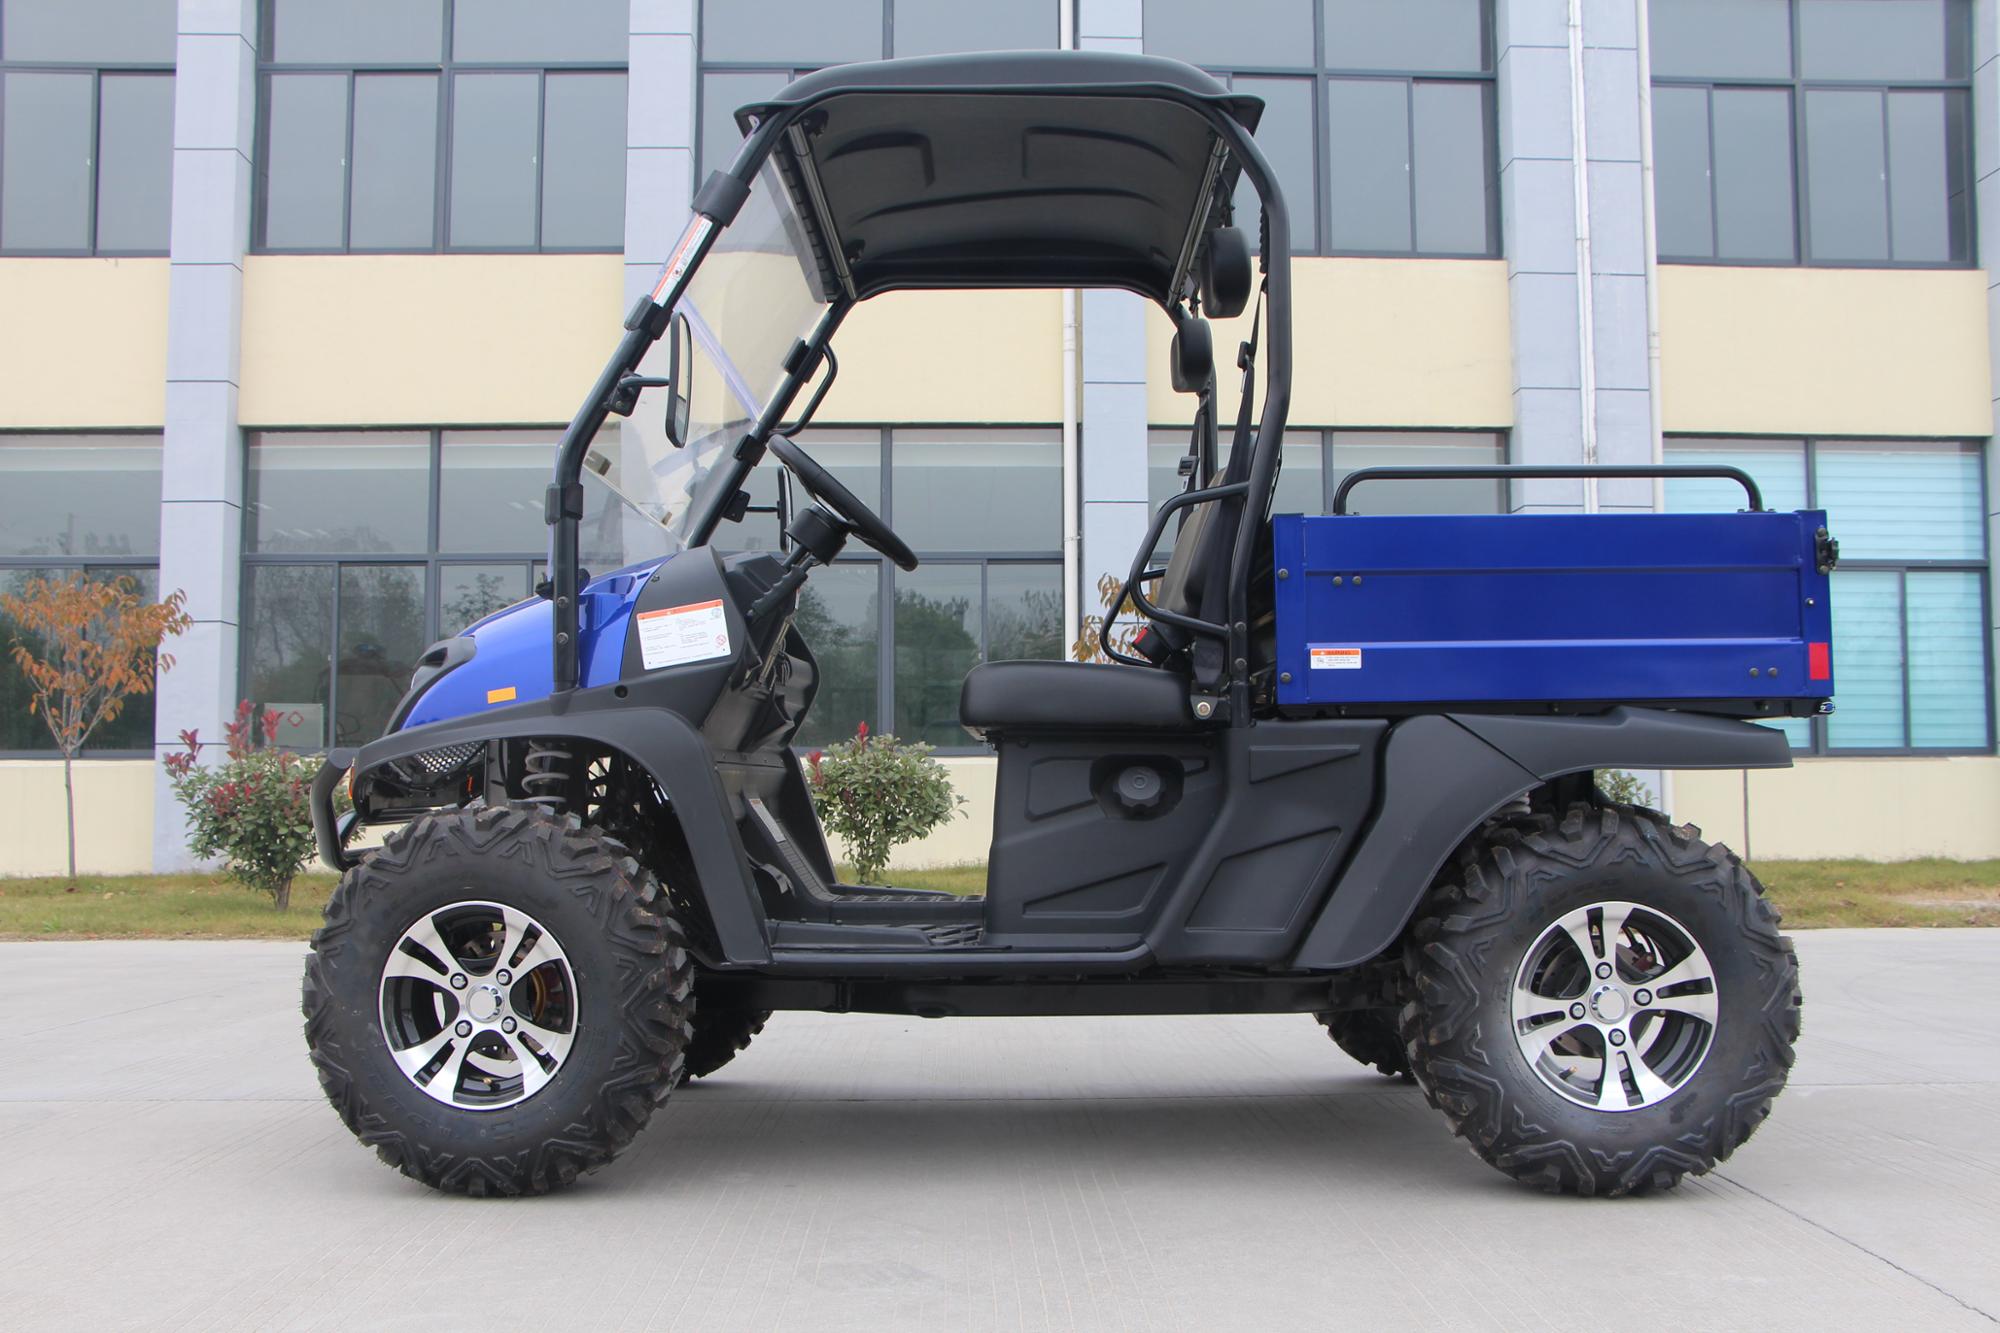 Exclusive Design Super Quality 400CC 4X4 UTV EFI Side by Side with EPA